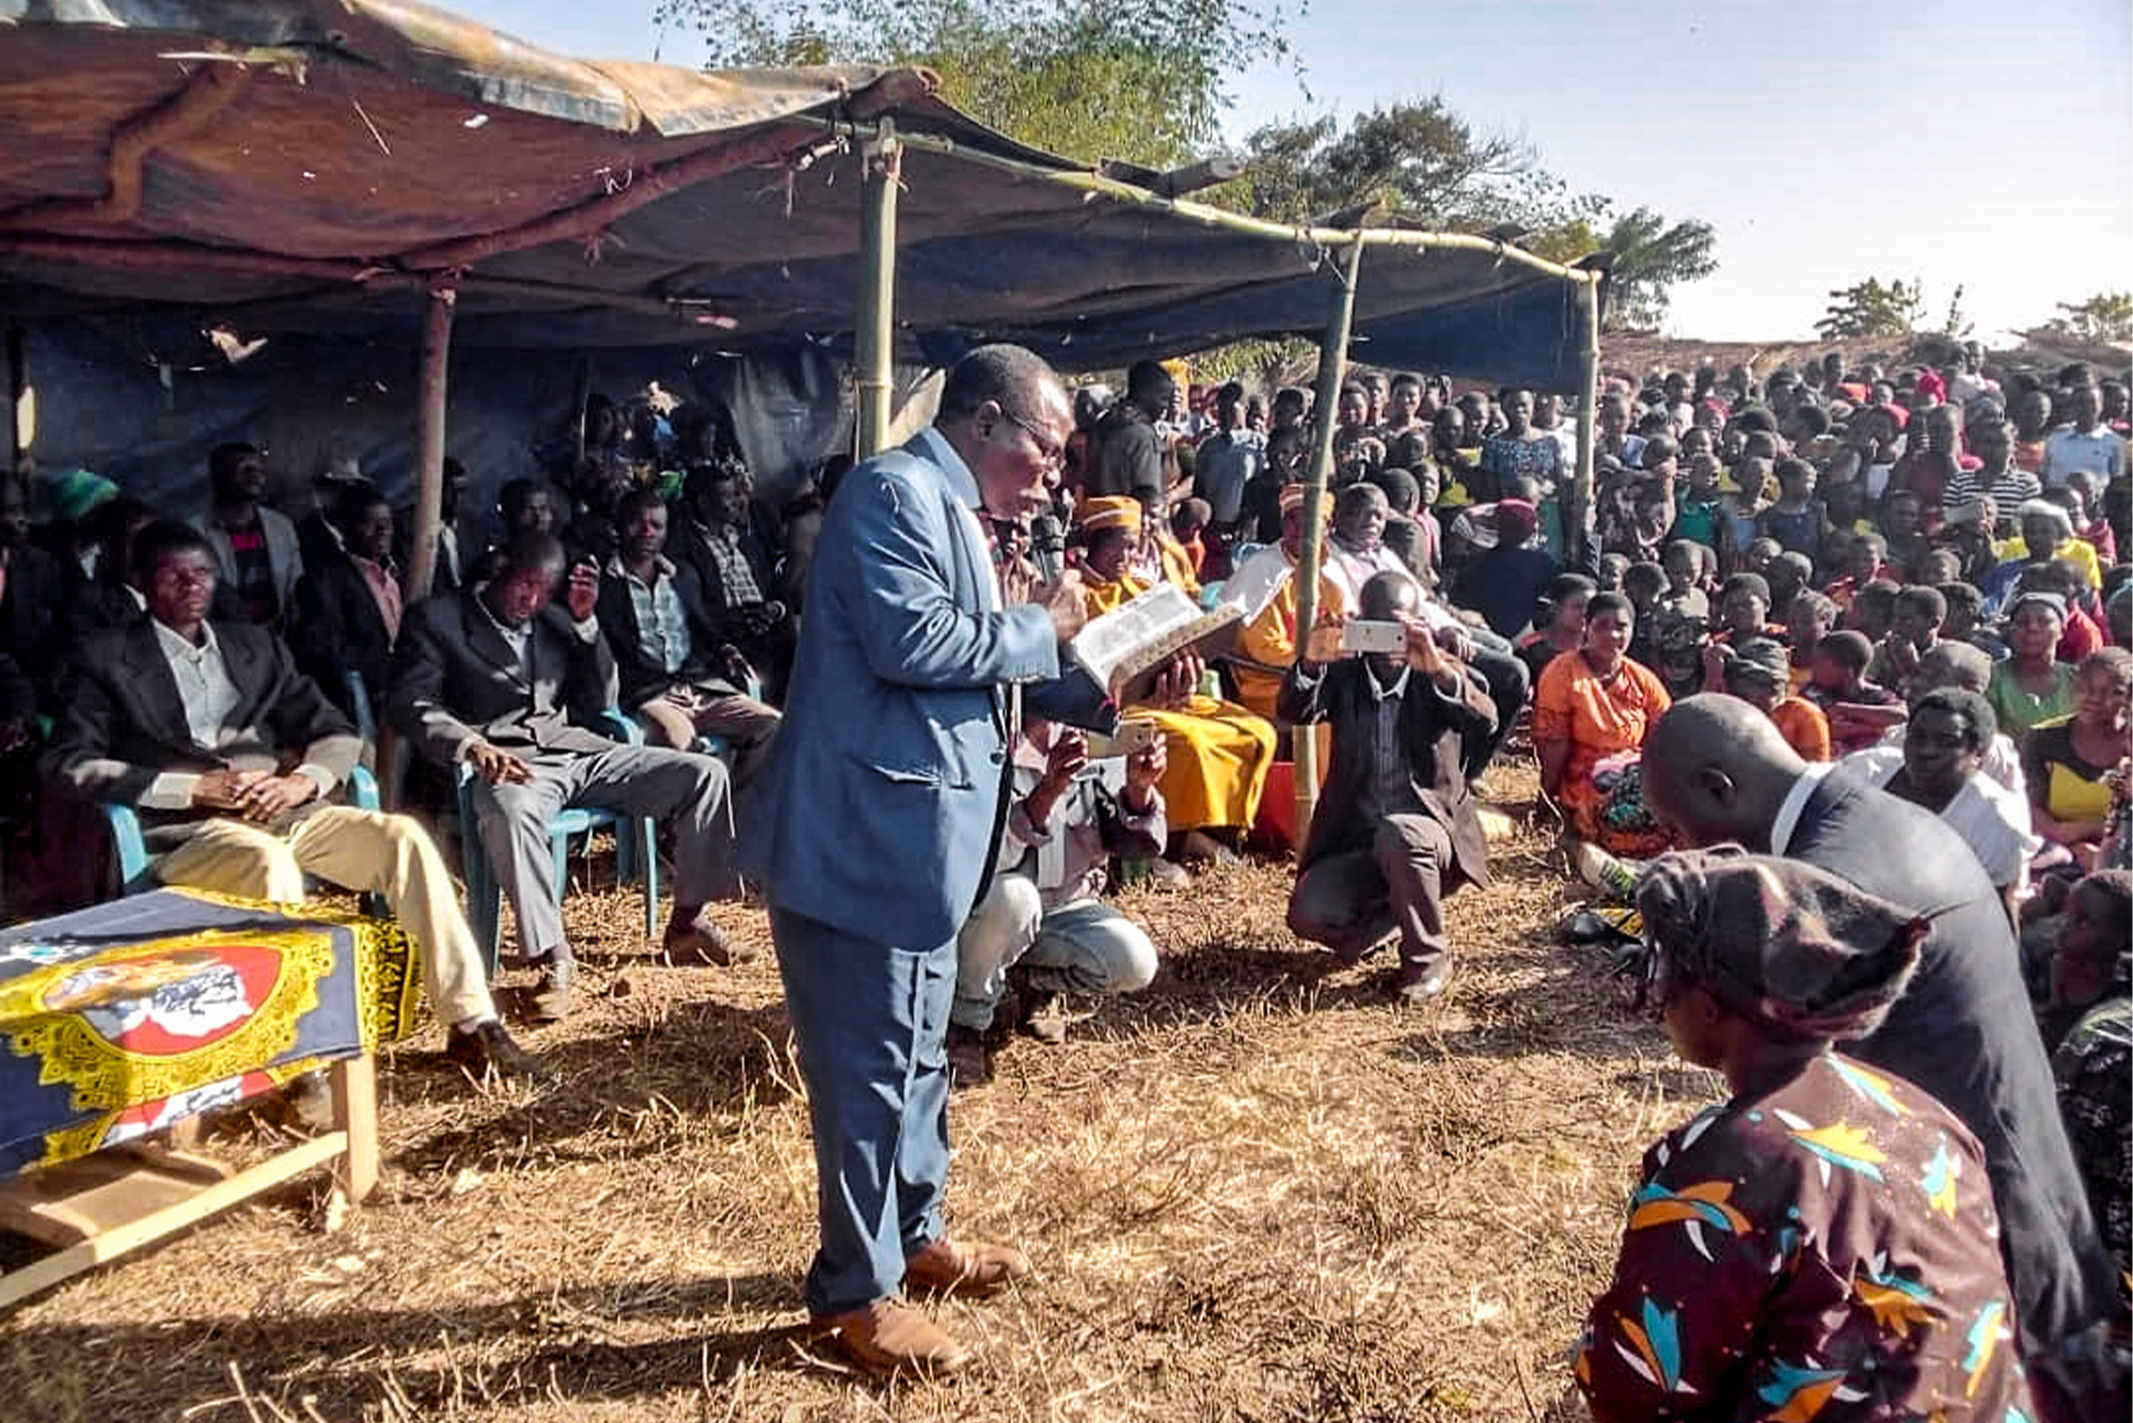 A Christian chief of a village in Africa reads from the Bible to an audience gathered around him for his inaugural ceremony